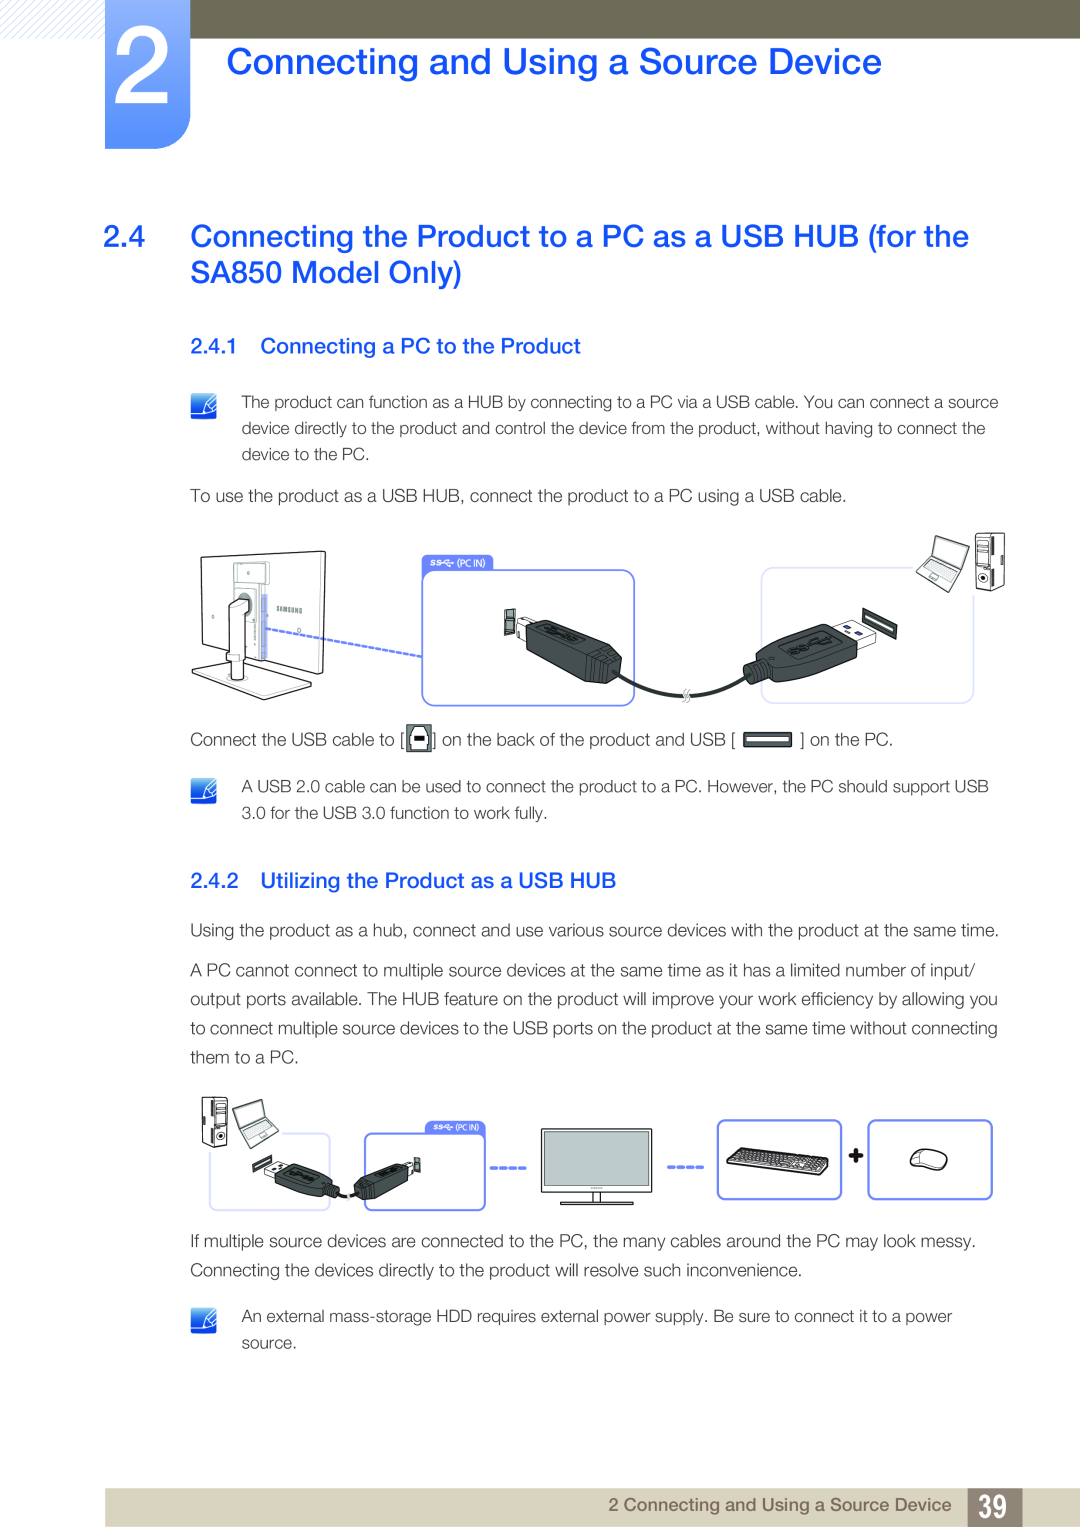 Samsung S24A650D Connecting a PC to the Product, Utilizing the Product as a USB HUB, Connecting and Using a Source Device 